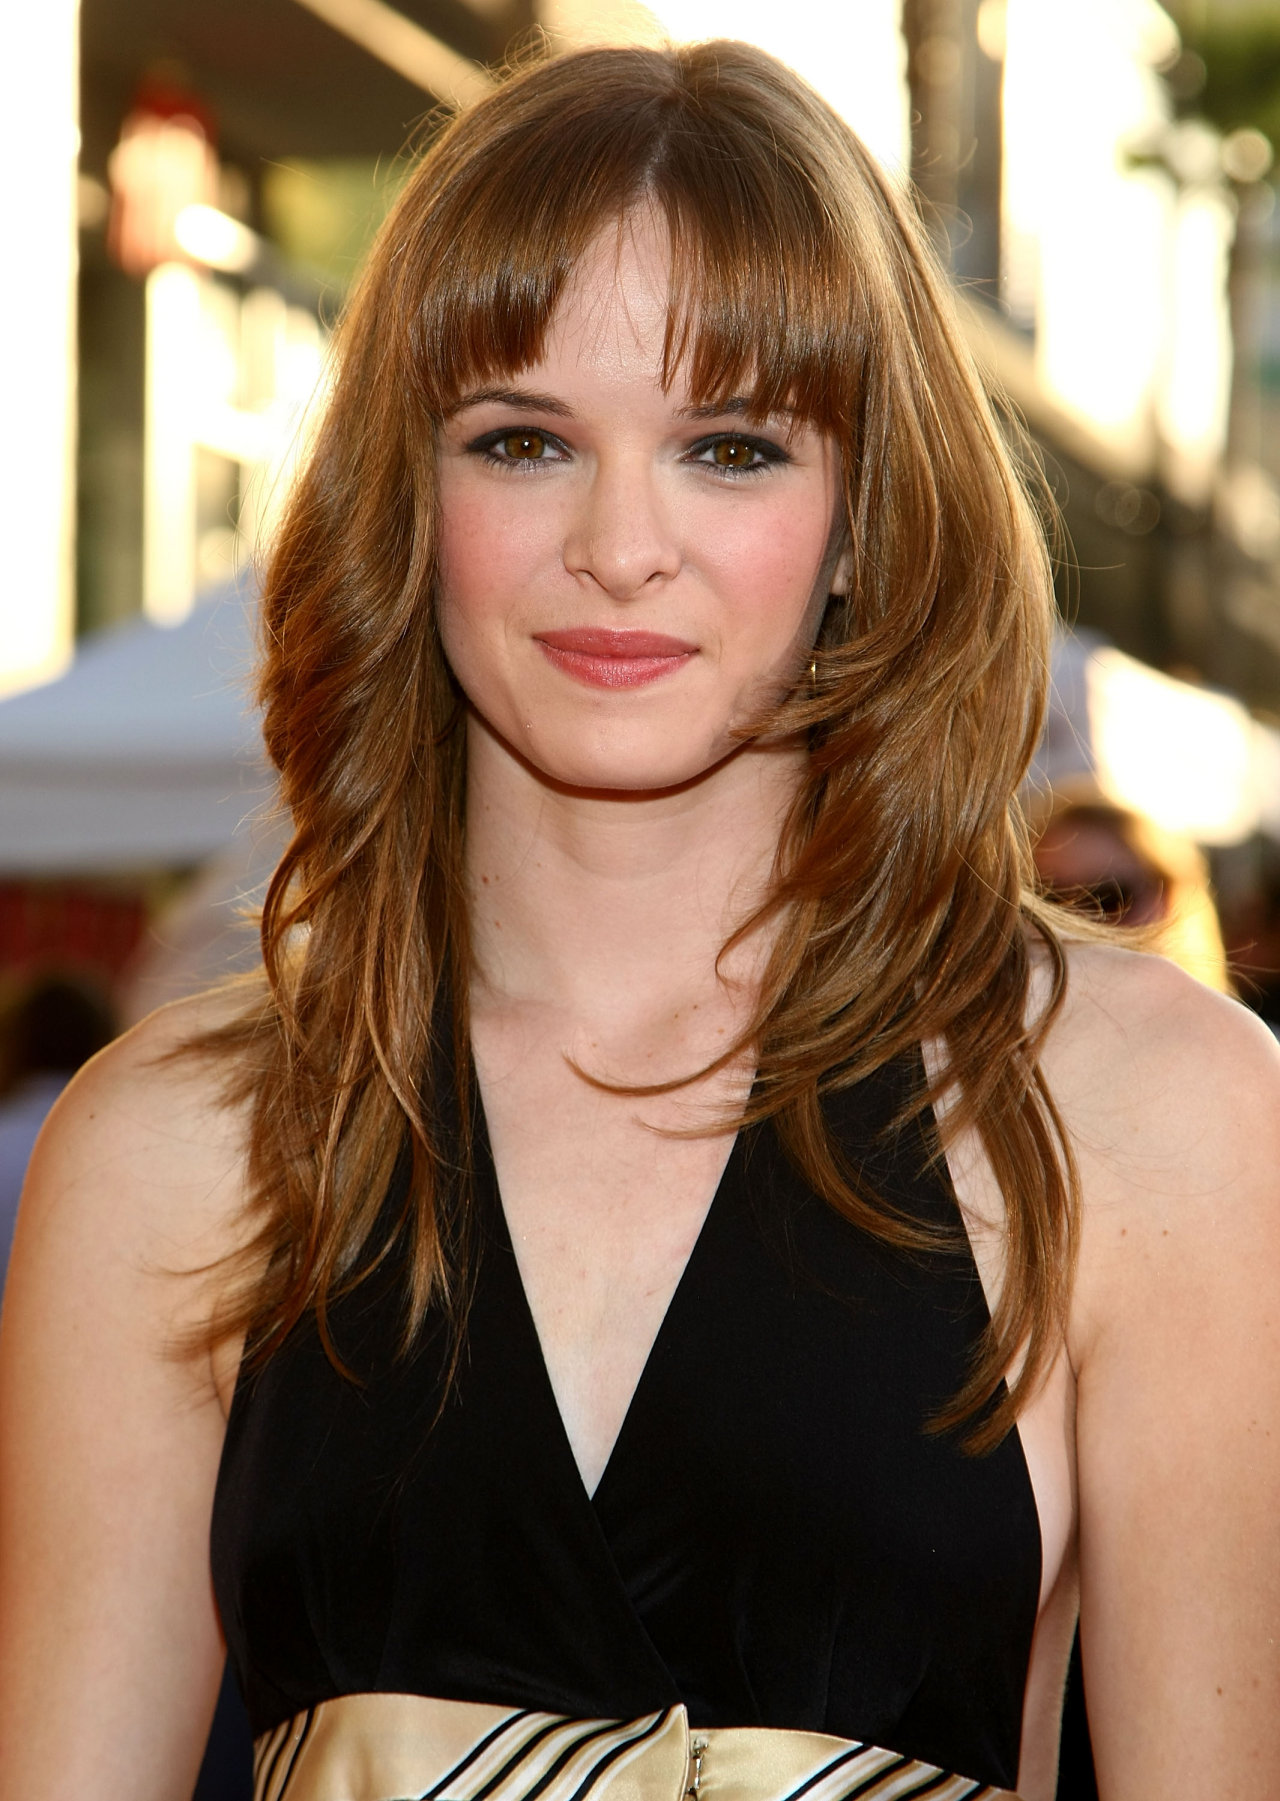 Danielle Panabaker leaked wallpapers